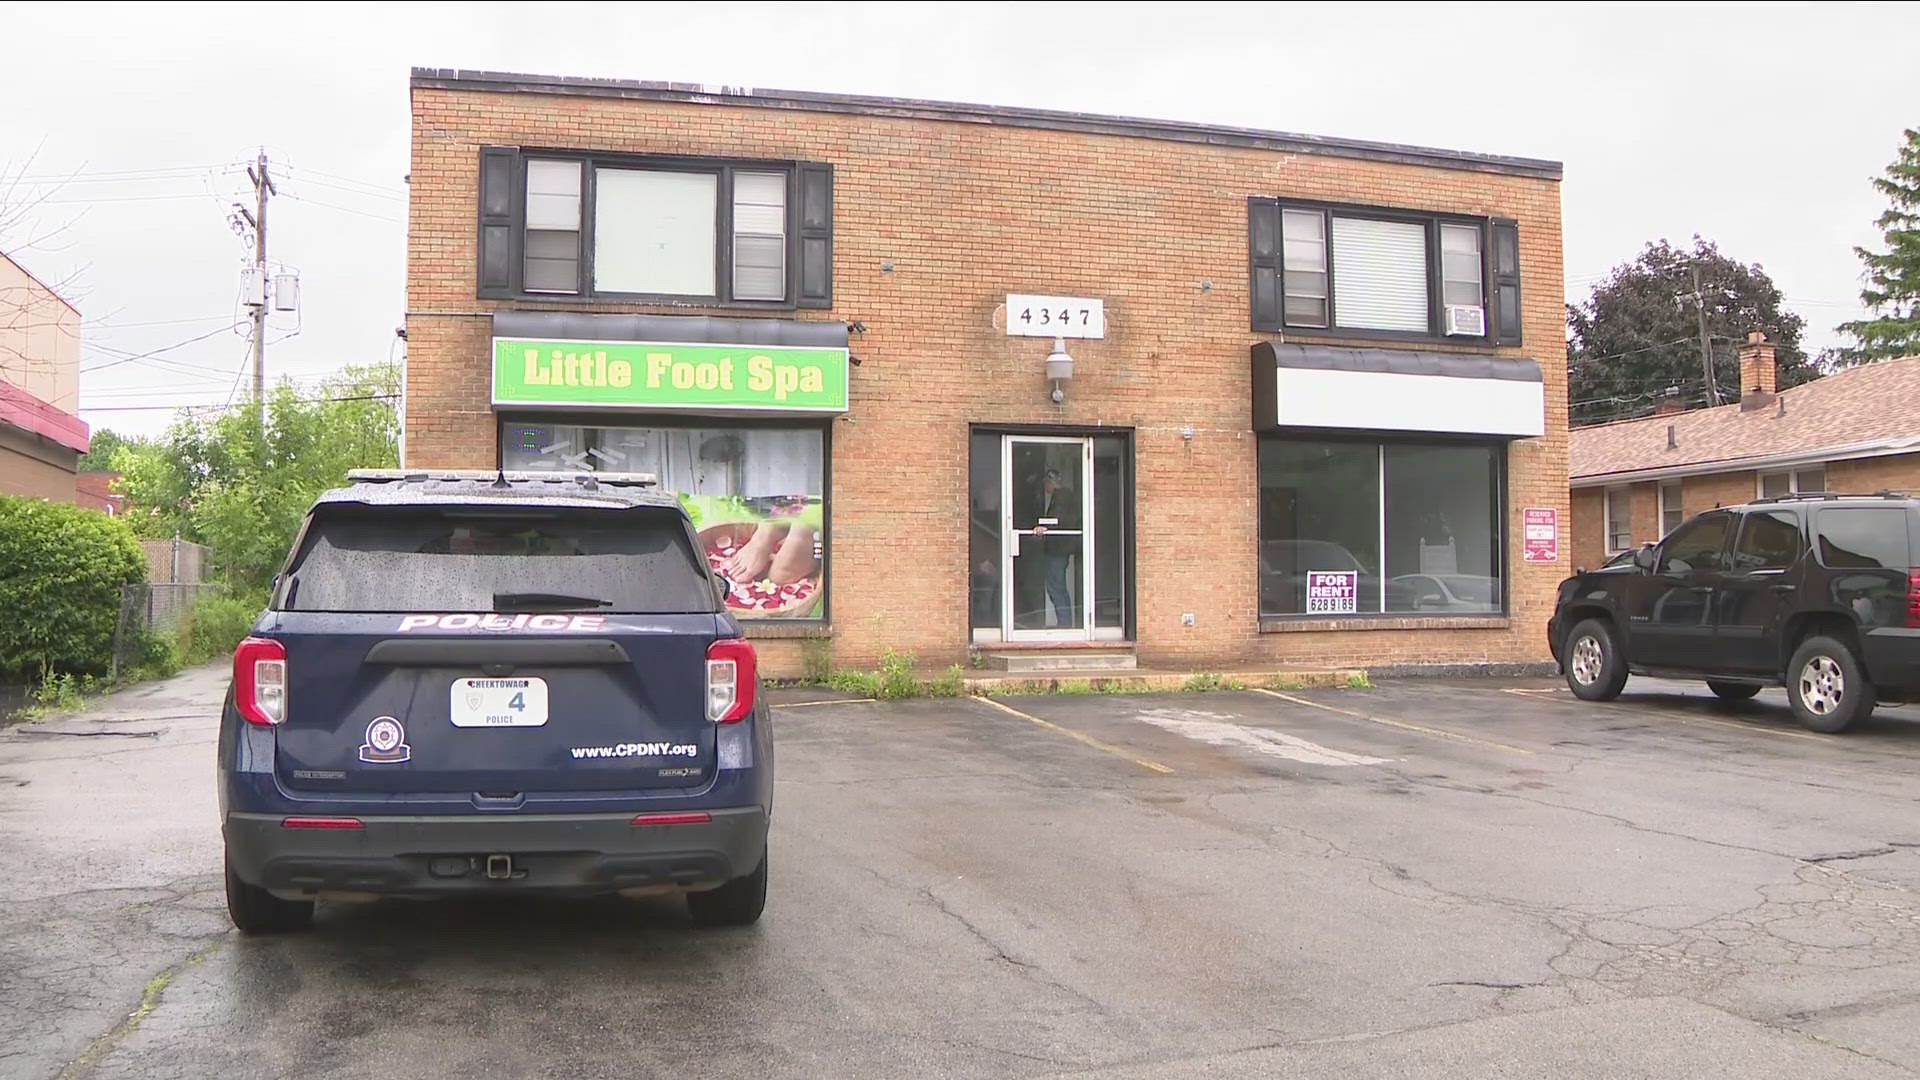 Police executed a search warrant at a massage spa they suspect is part of a sex trafficking operation.